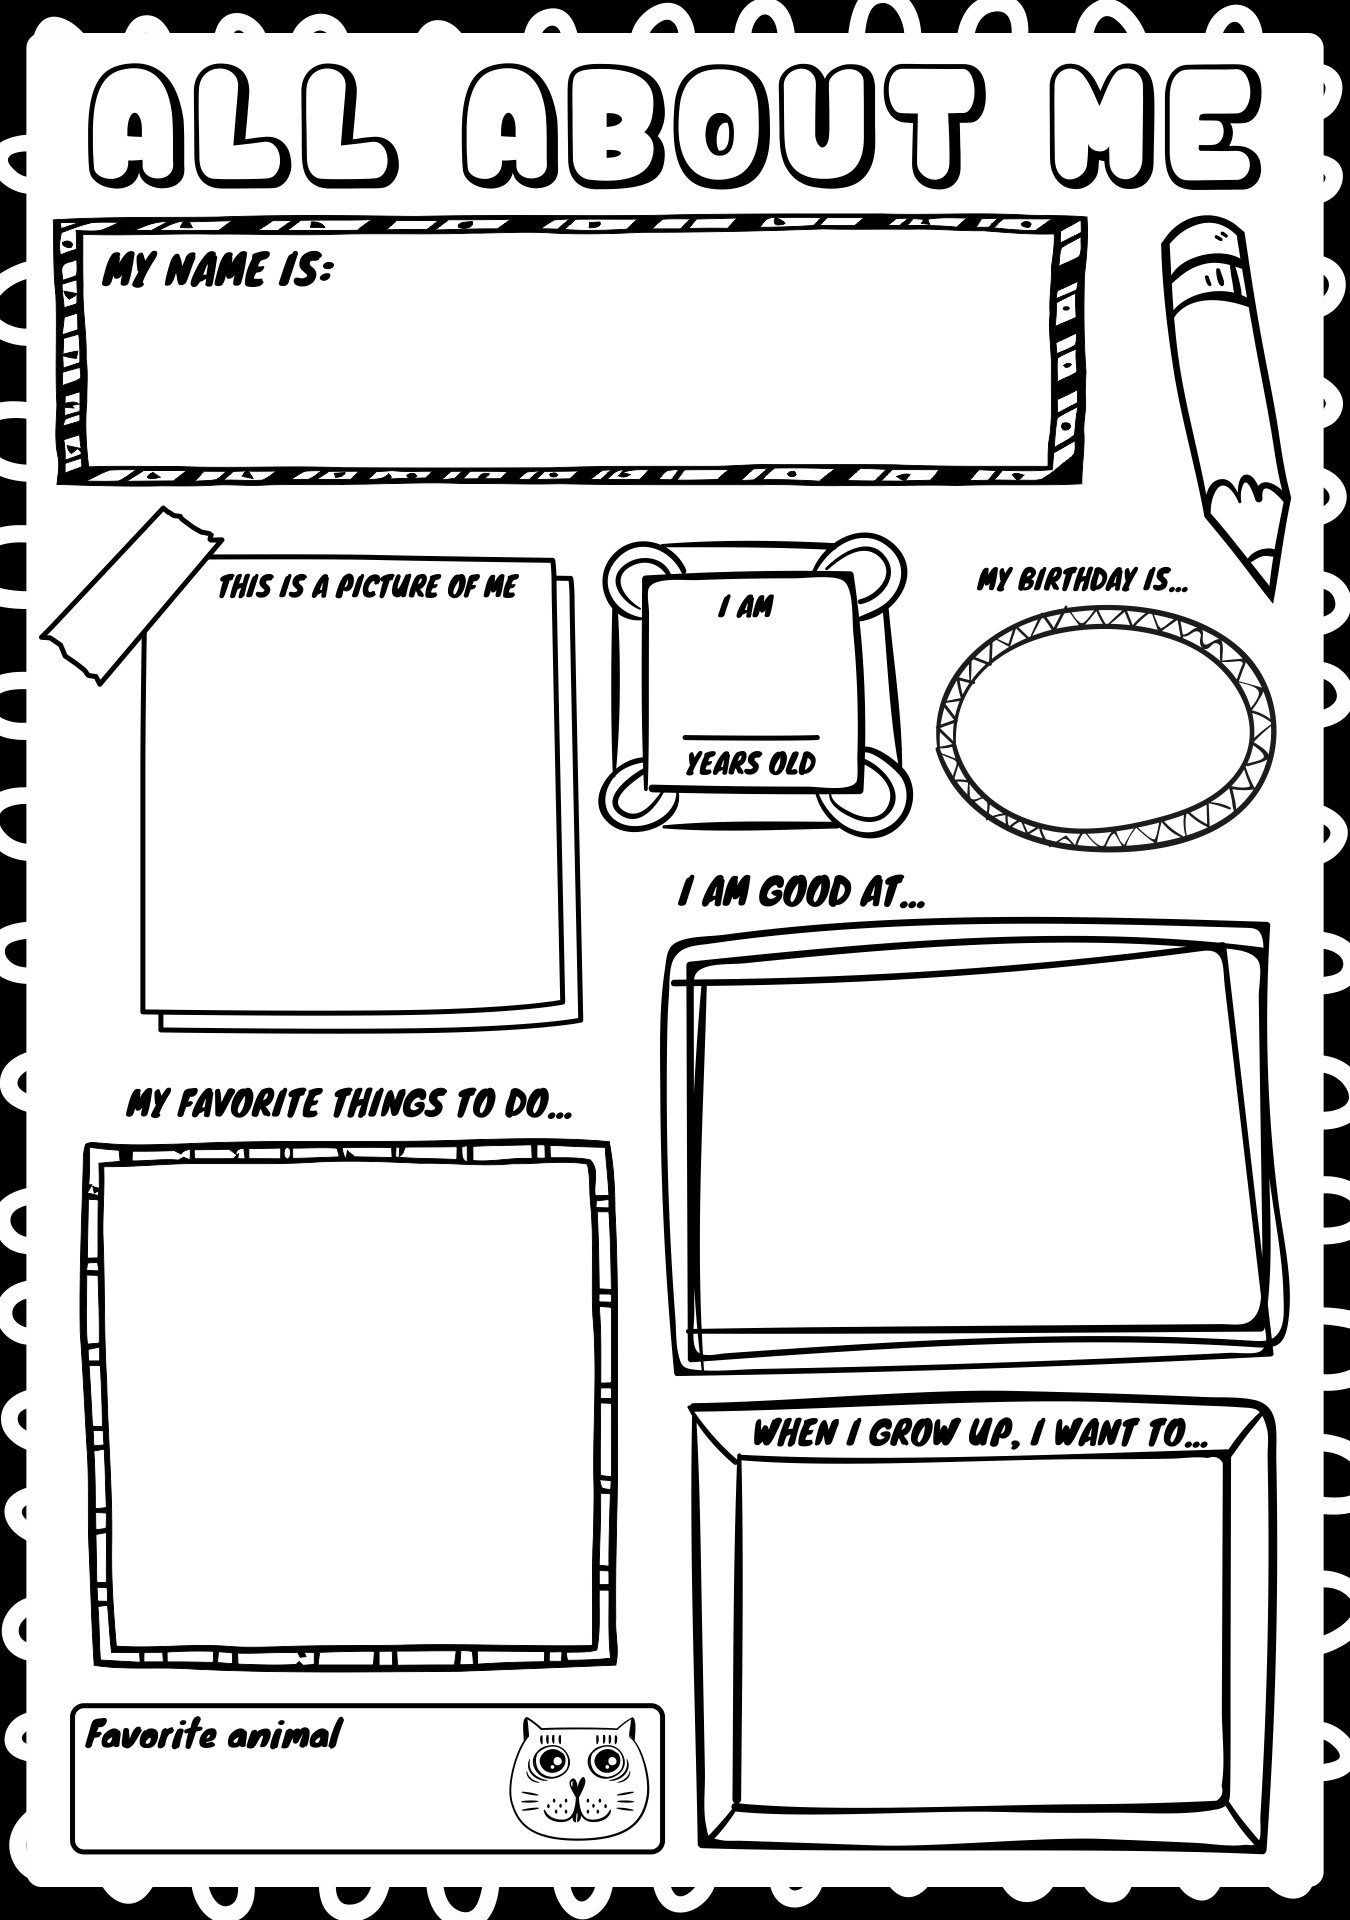 All About Me Childrens Activity Sheets